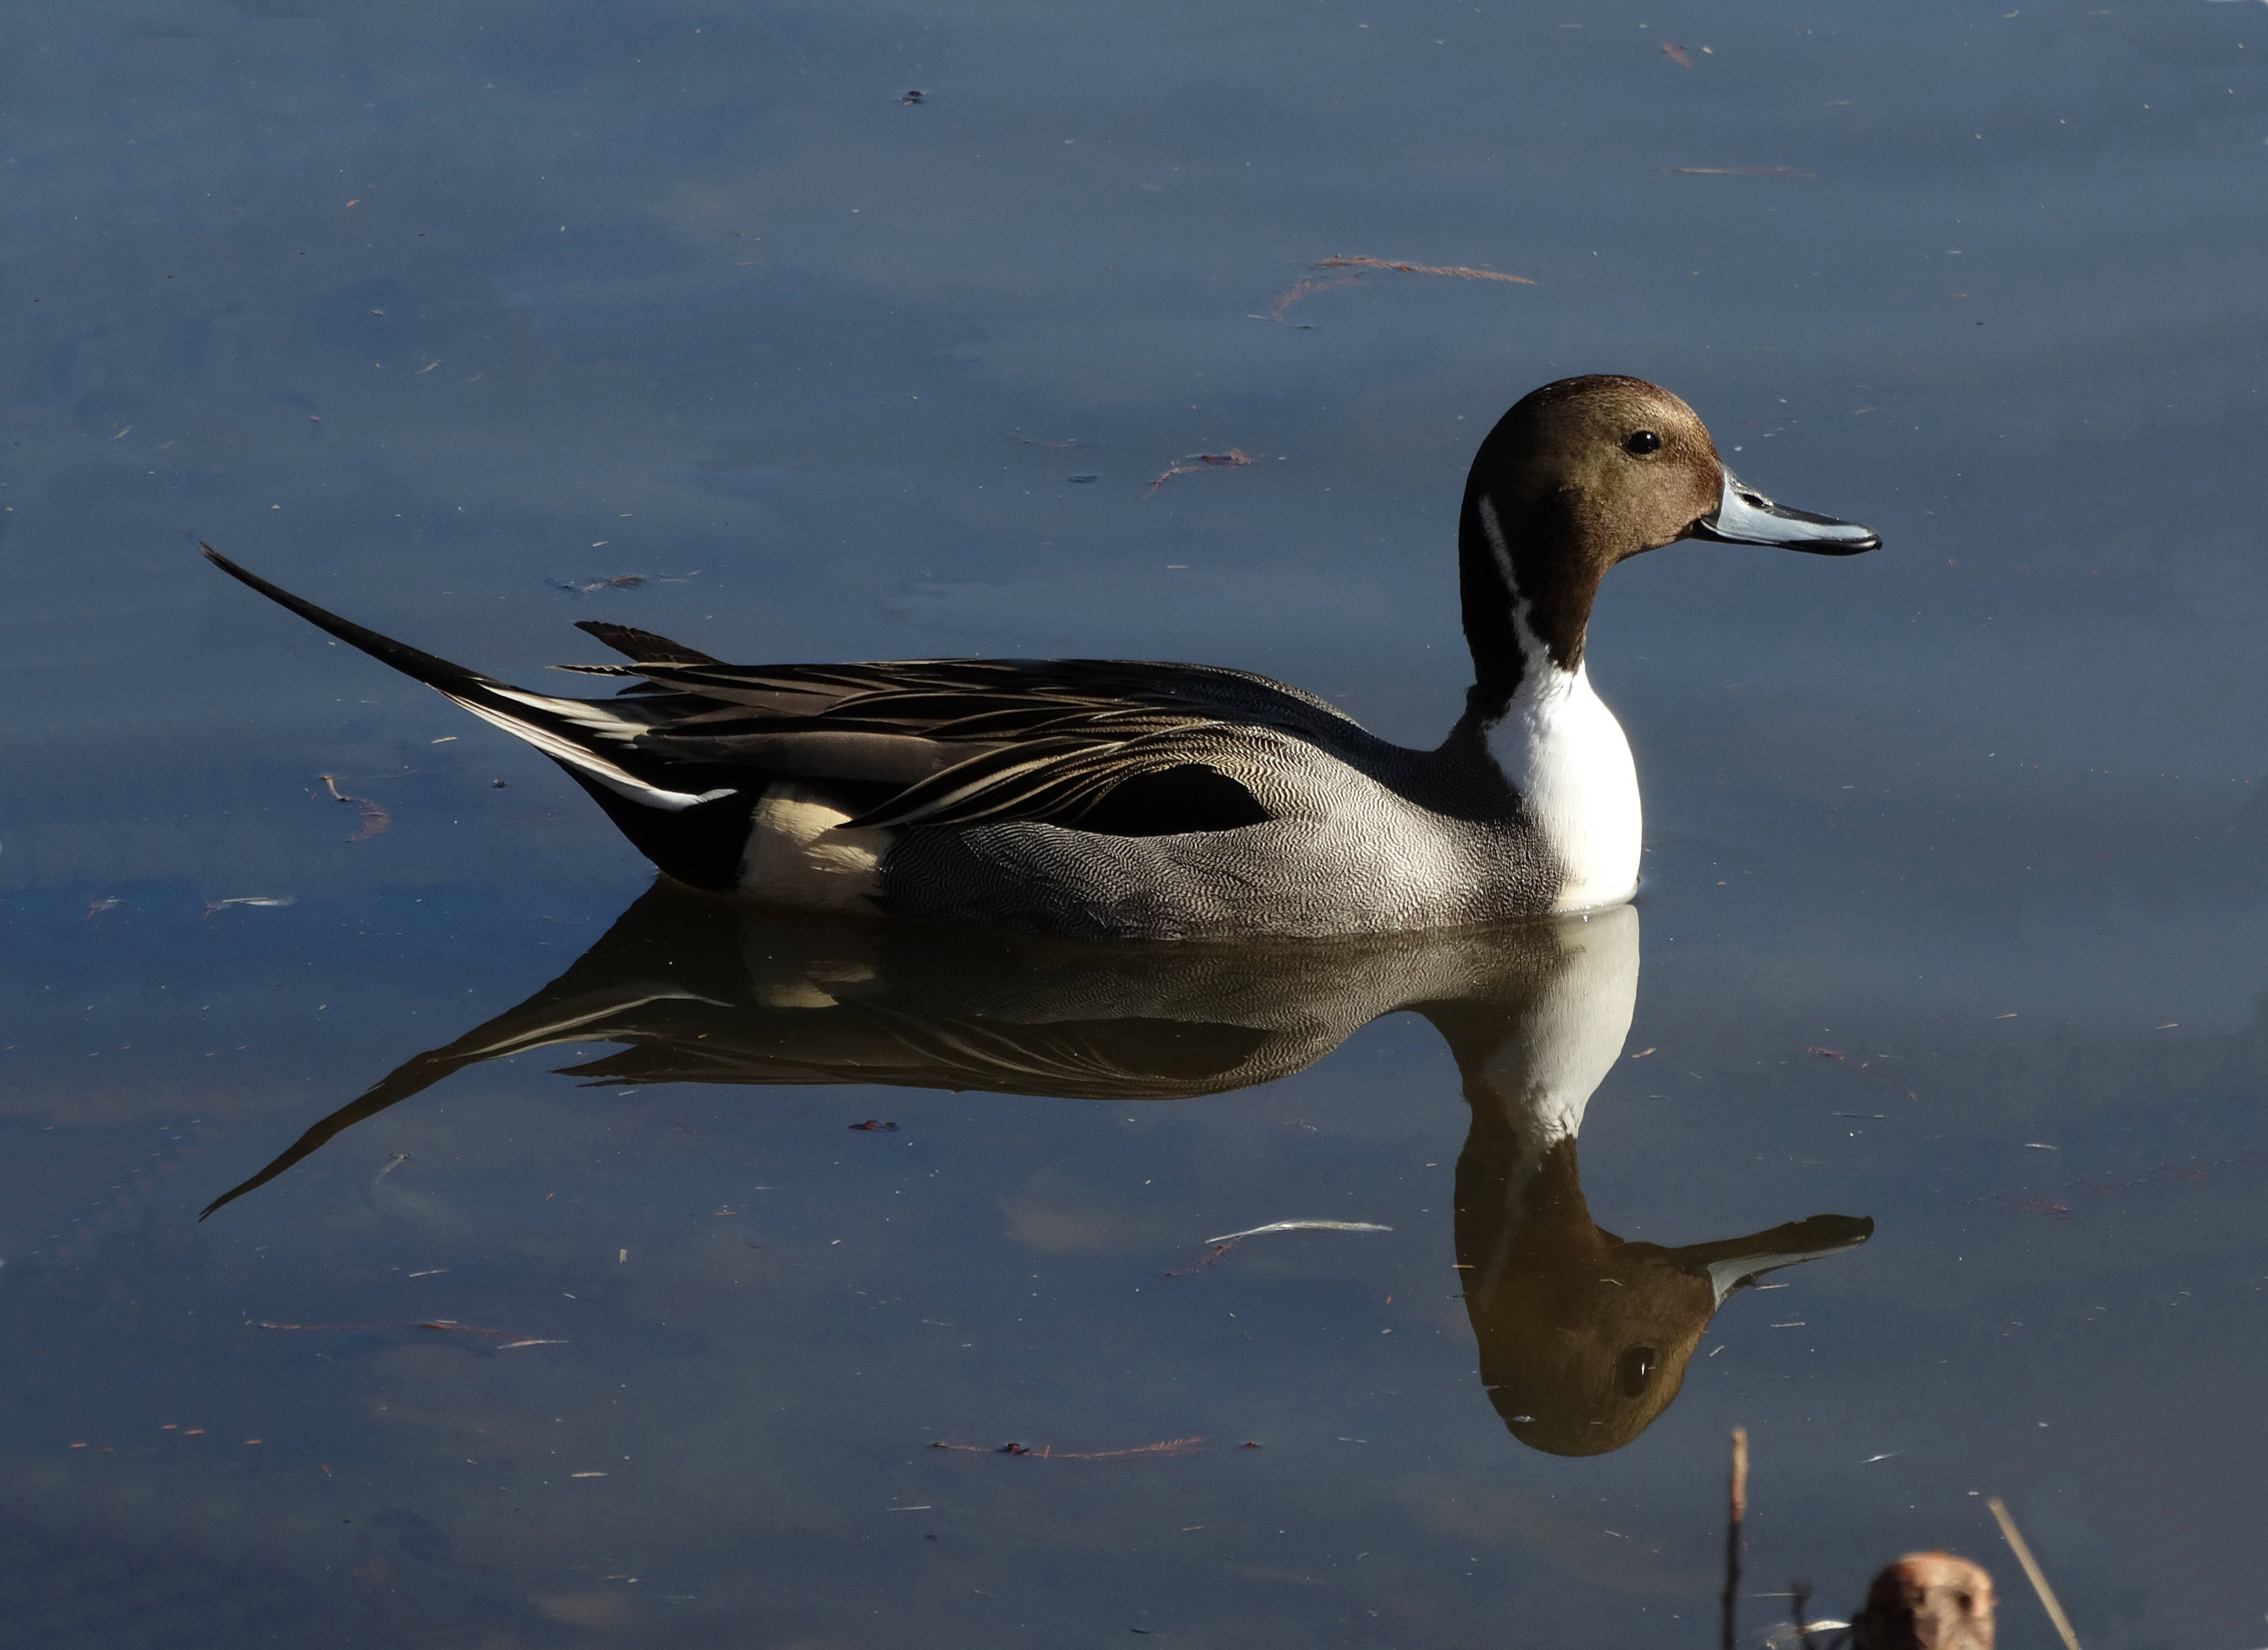 Divine Inspiration Photo #13A - Northern Pintail with Reflection - 8 x 10